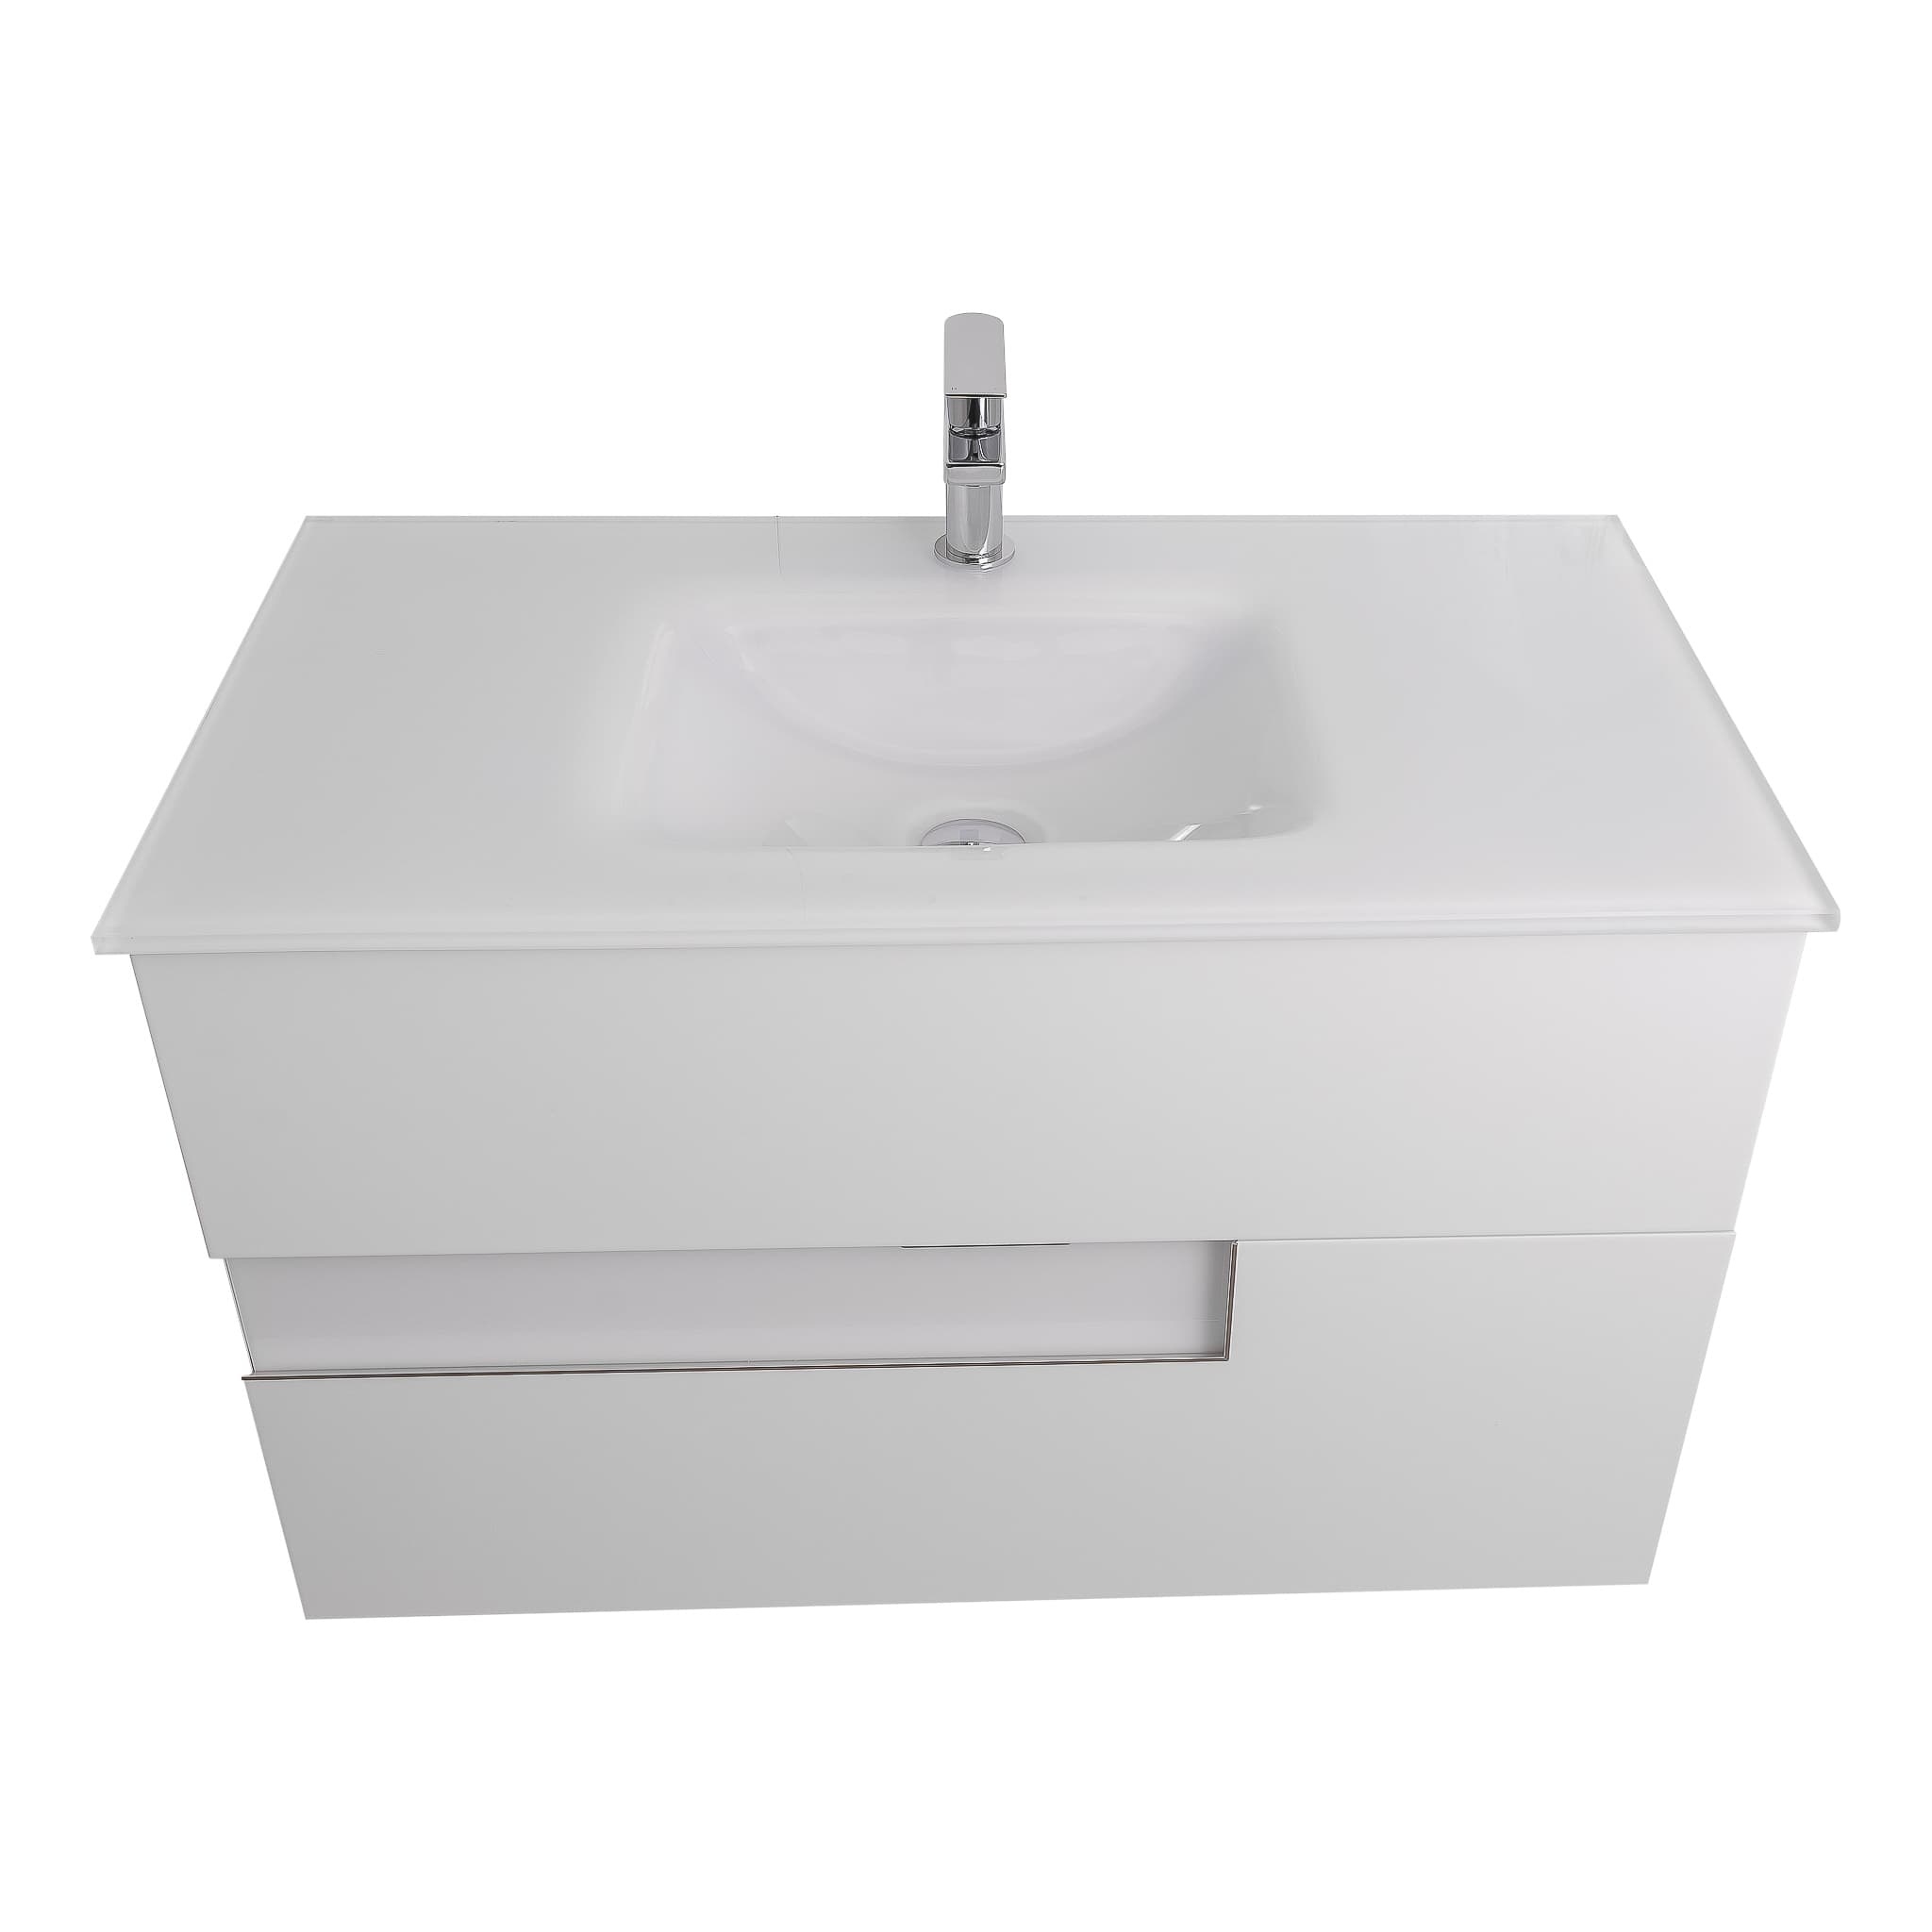 Vision 35.5 White High Gloss Cabinet, White Tempered Glass Sink, Wall Mounted Modern Vanity Set